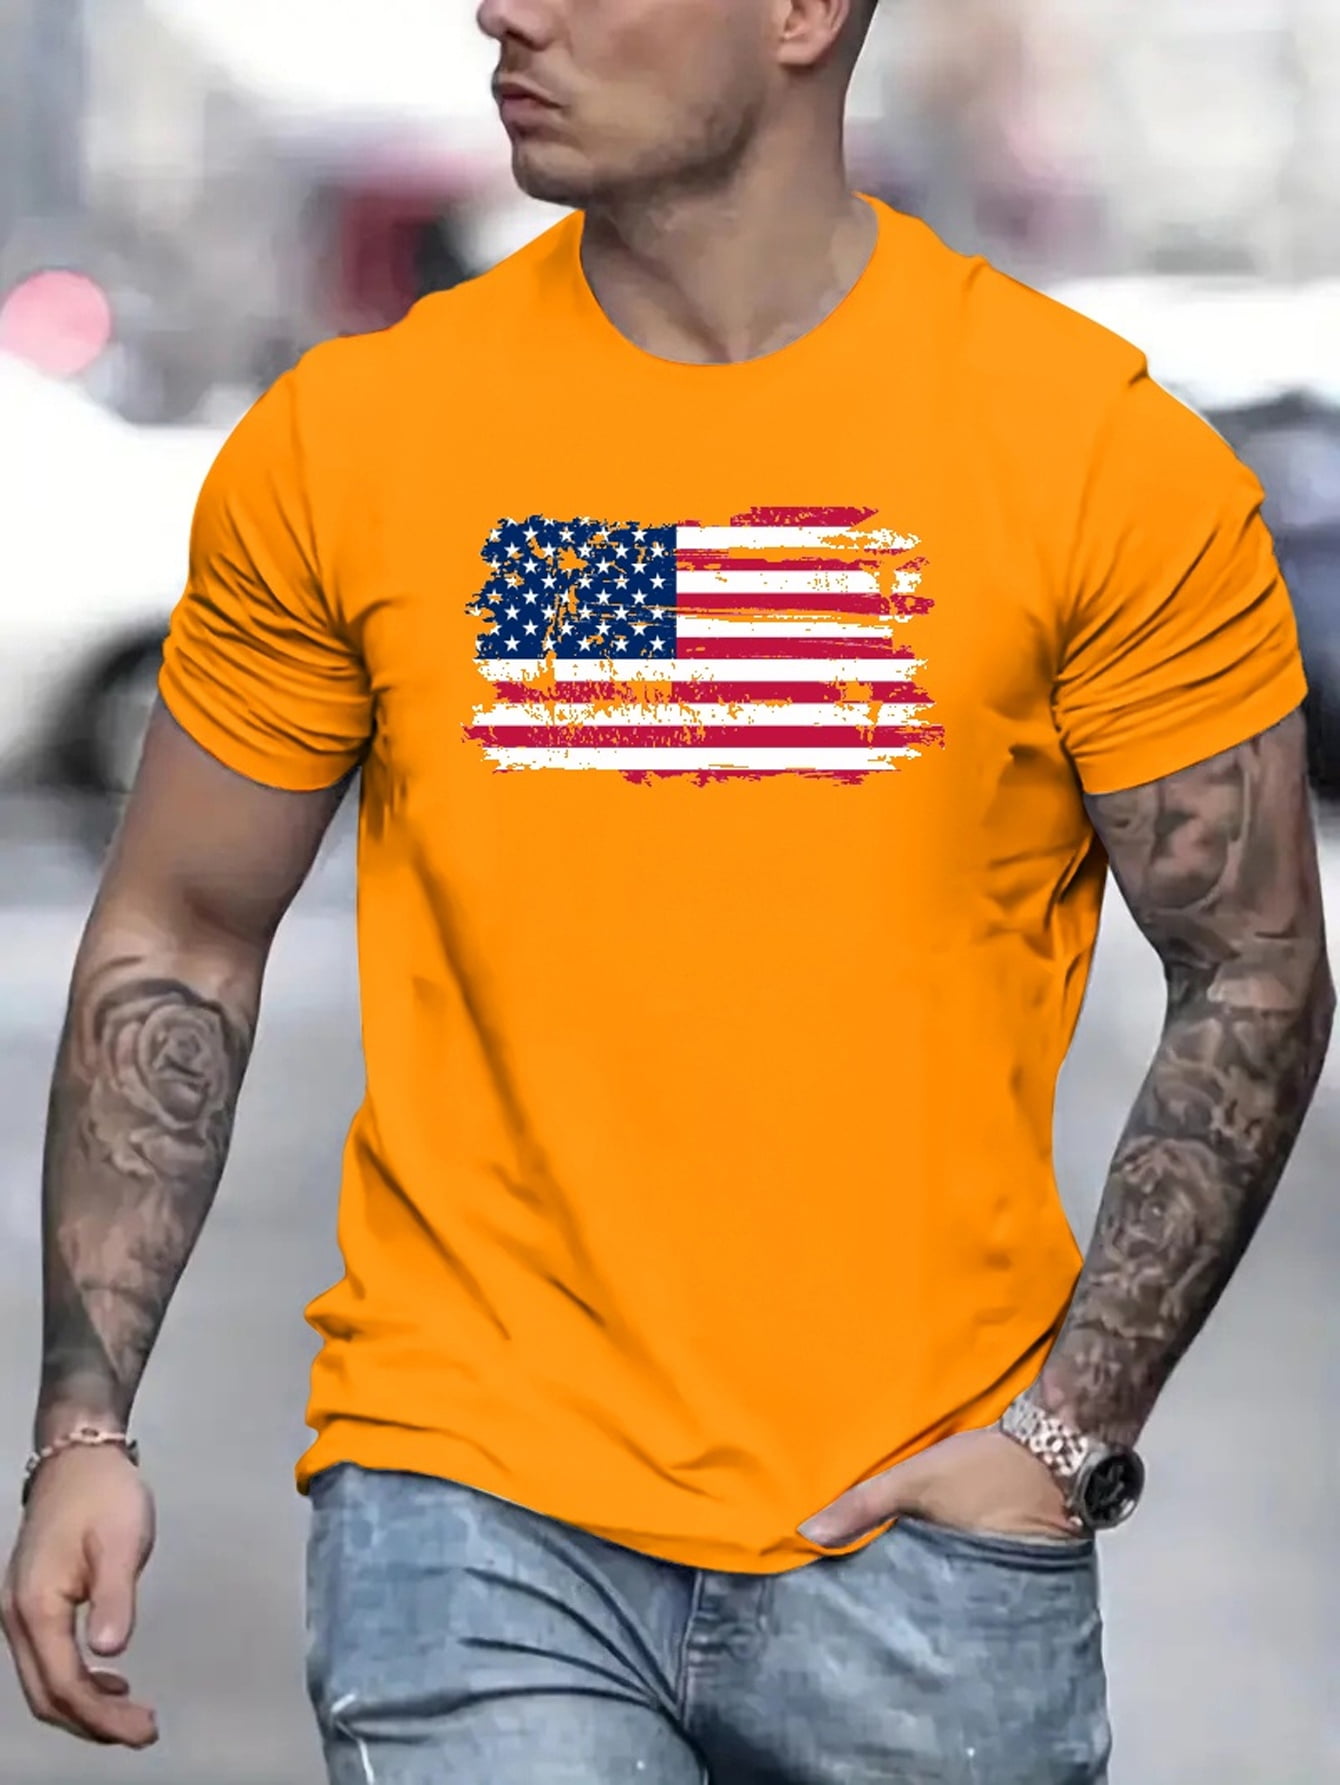 American Flag Men's Vintage T-shirt For Summer Outdoor, Casual Mid ...